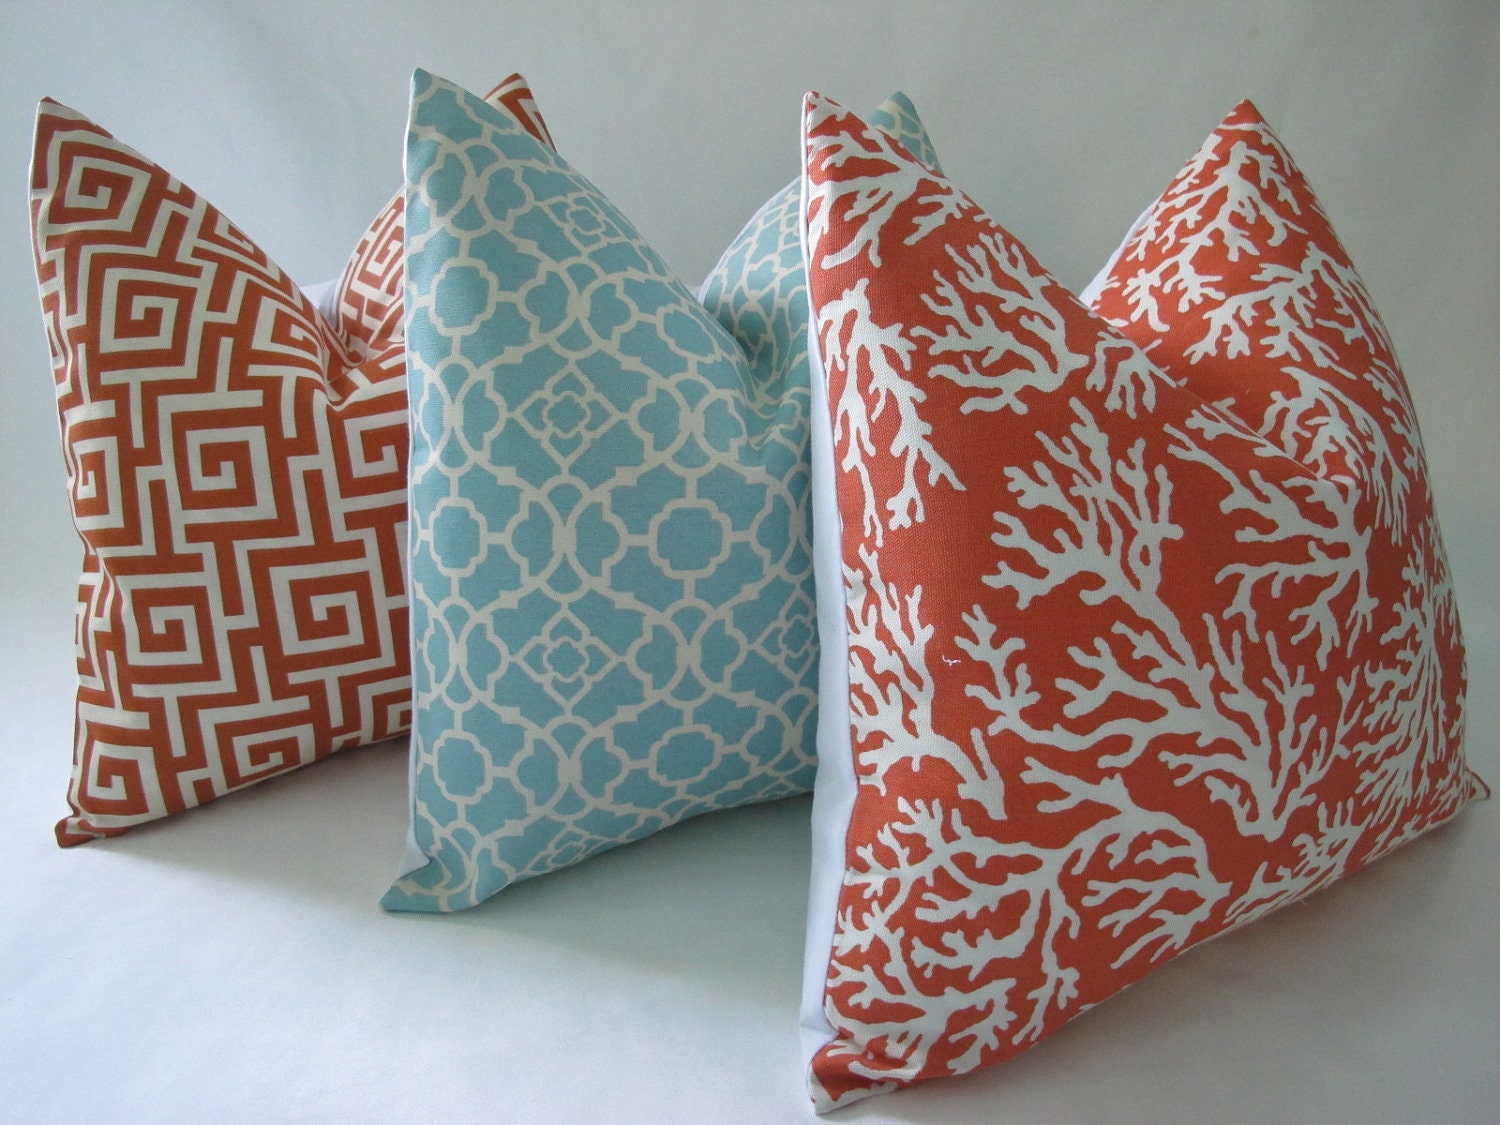 Free US Shipping-Decorative Designer Pillow Cover-Coral Reef In Mandarin